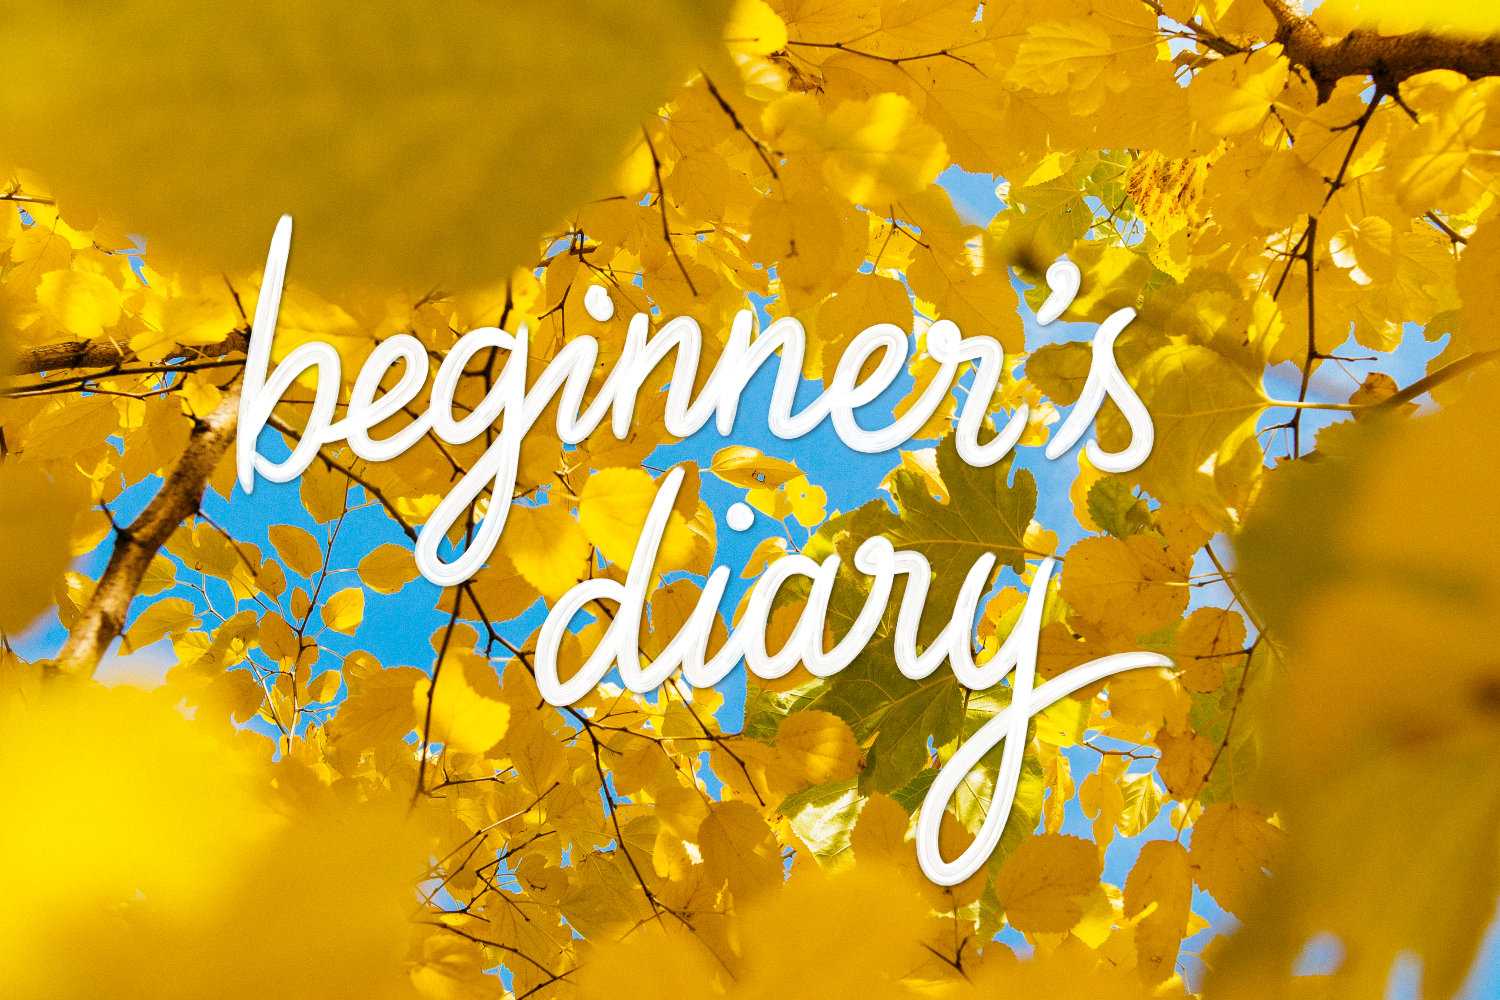 How to write a diary entry — 5 tips for beginners